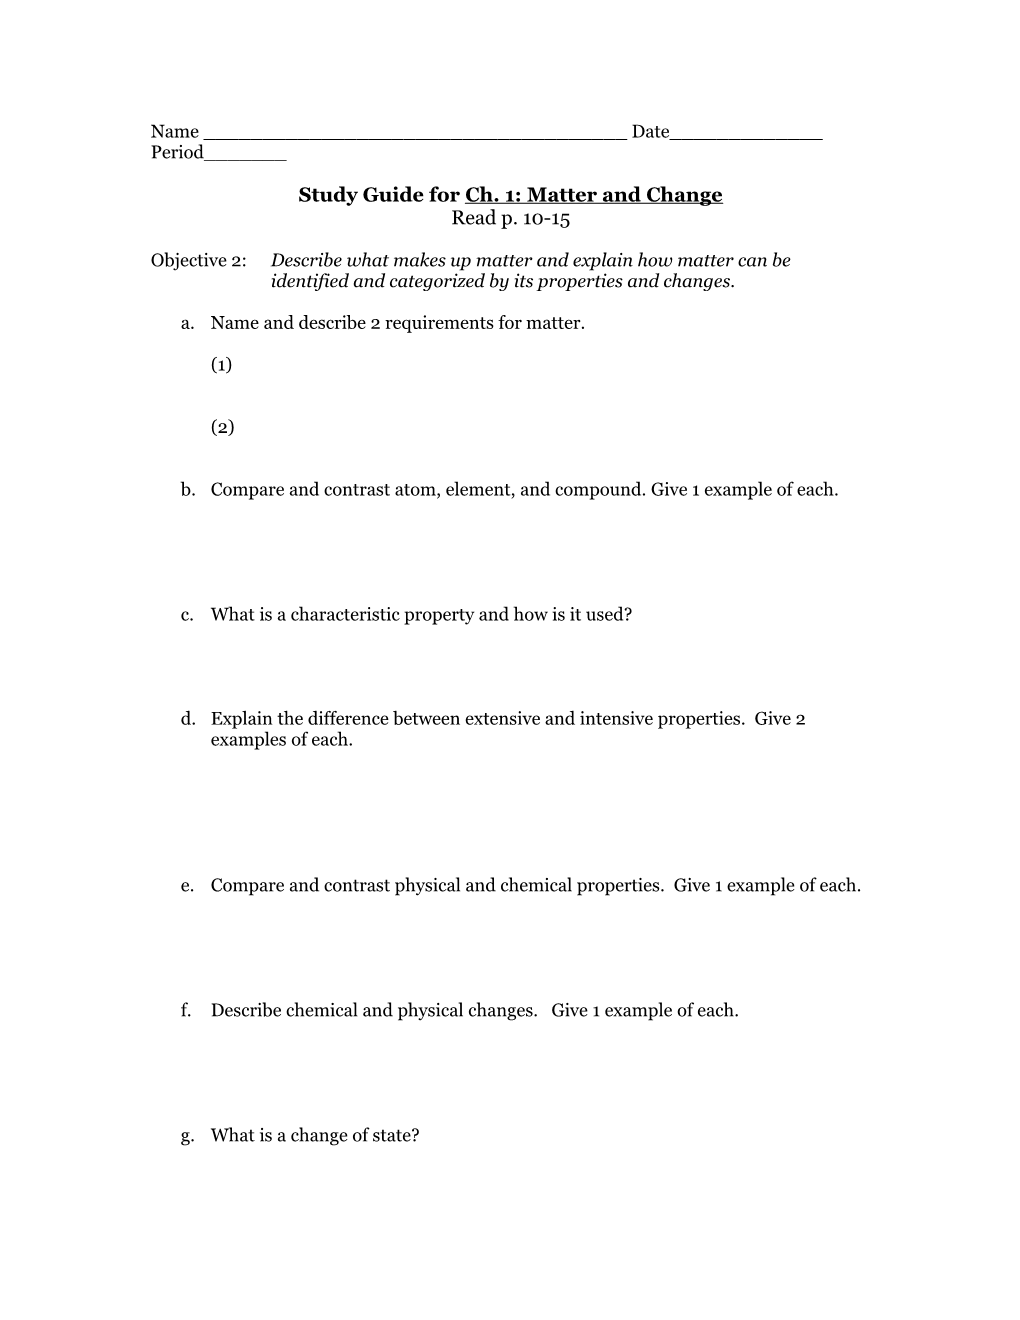 Study Guide for Ch. 1: Matter and Change